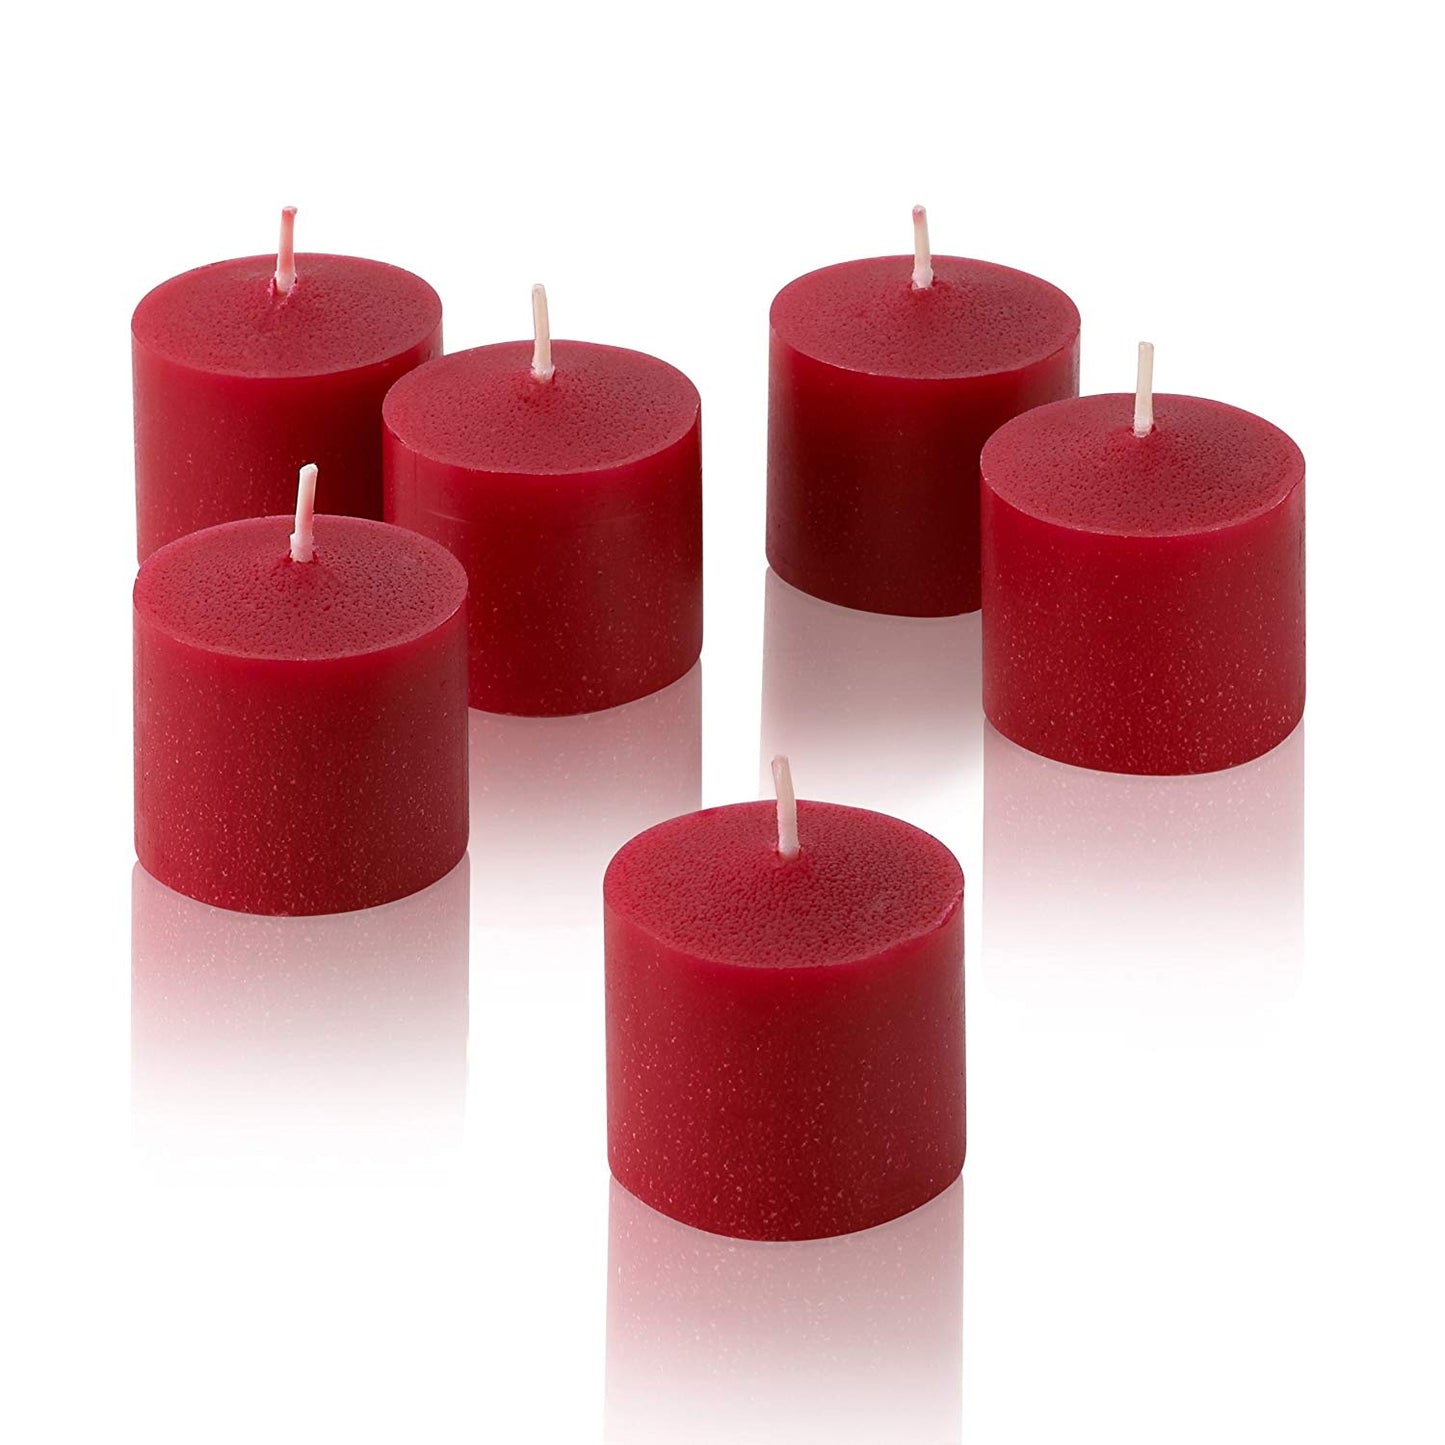 Wax Votive Candles 8 Hours Burning Unscented Ideal for Birthday Aromatherapy Party Candle Gardens & Home Décor (Set of 12, Red)